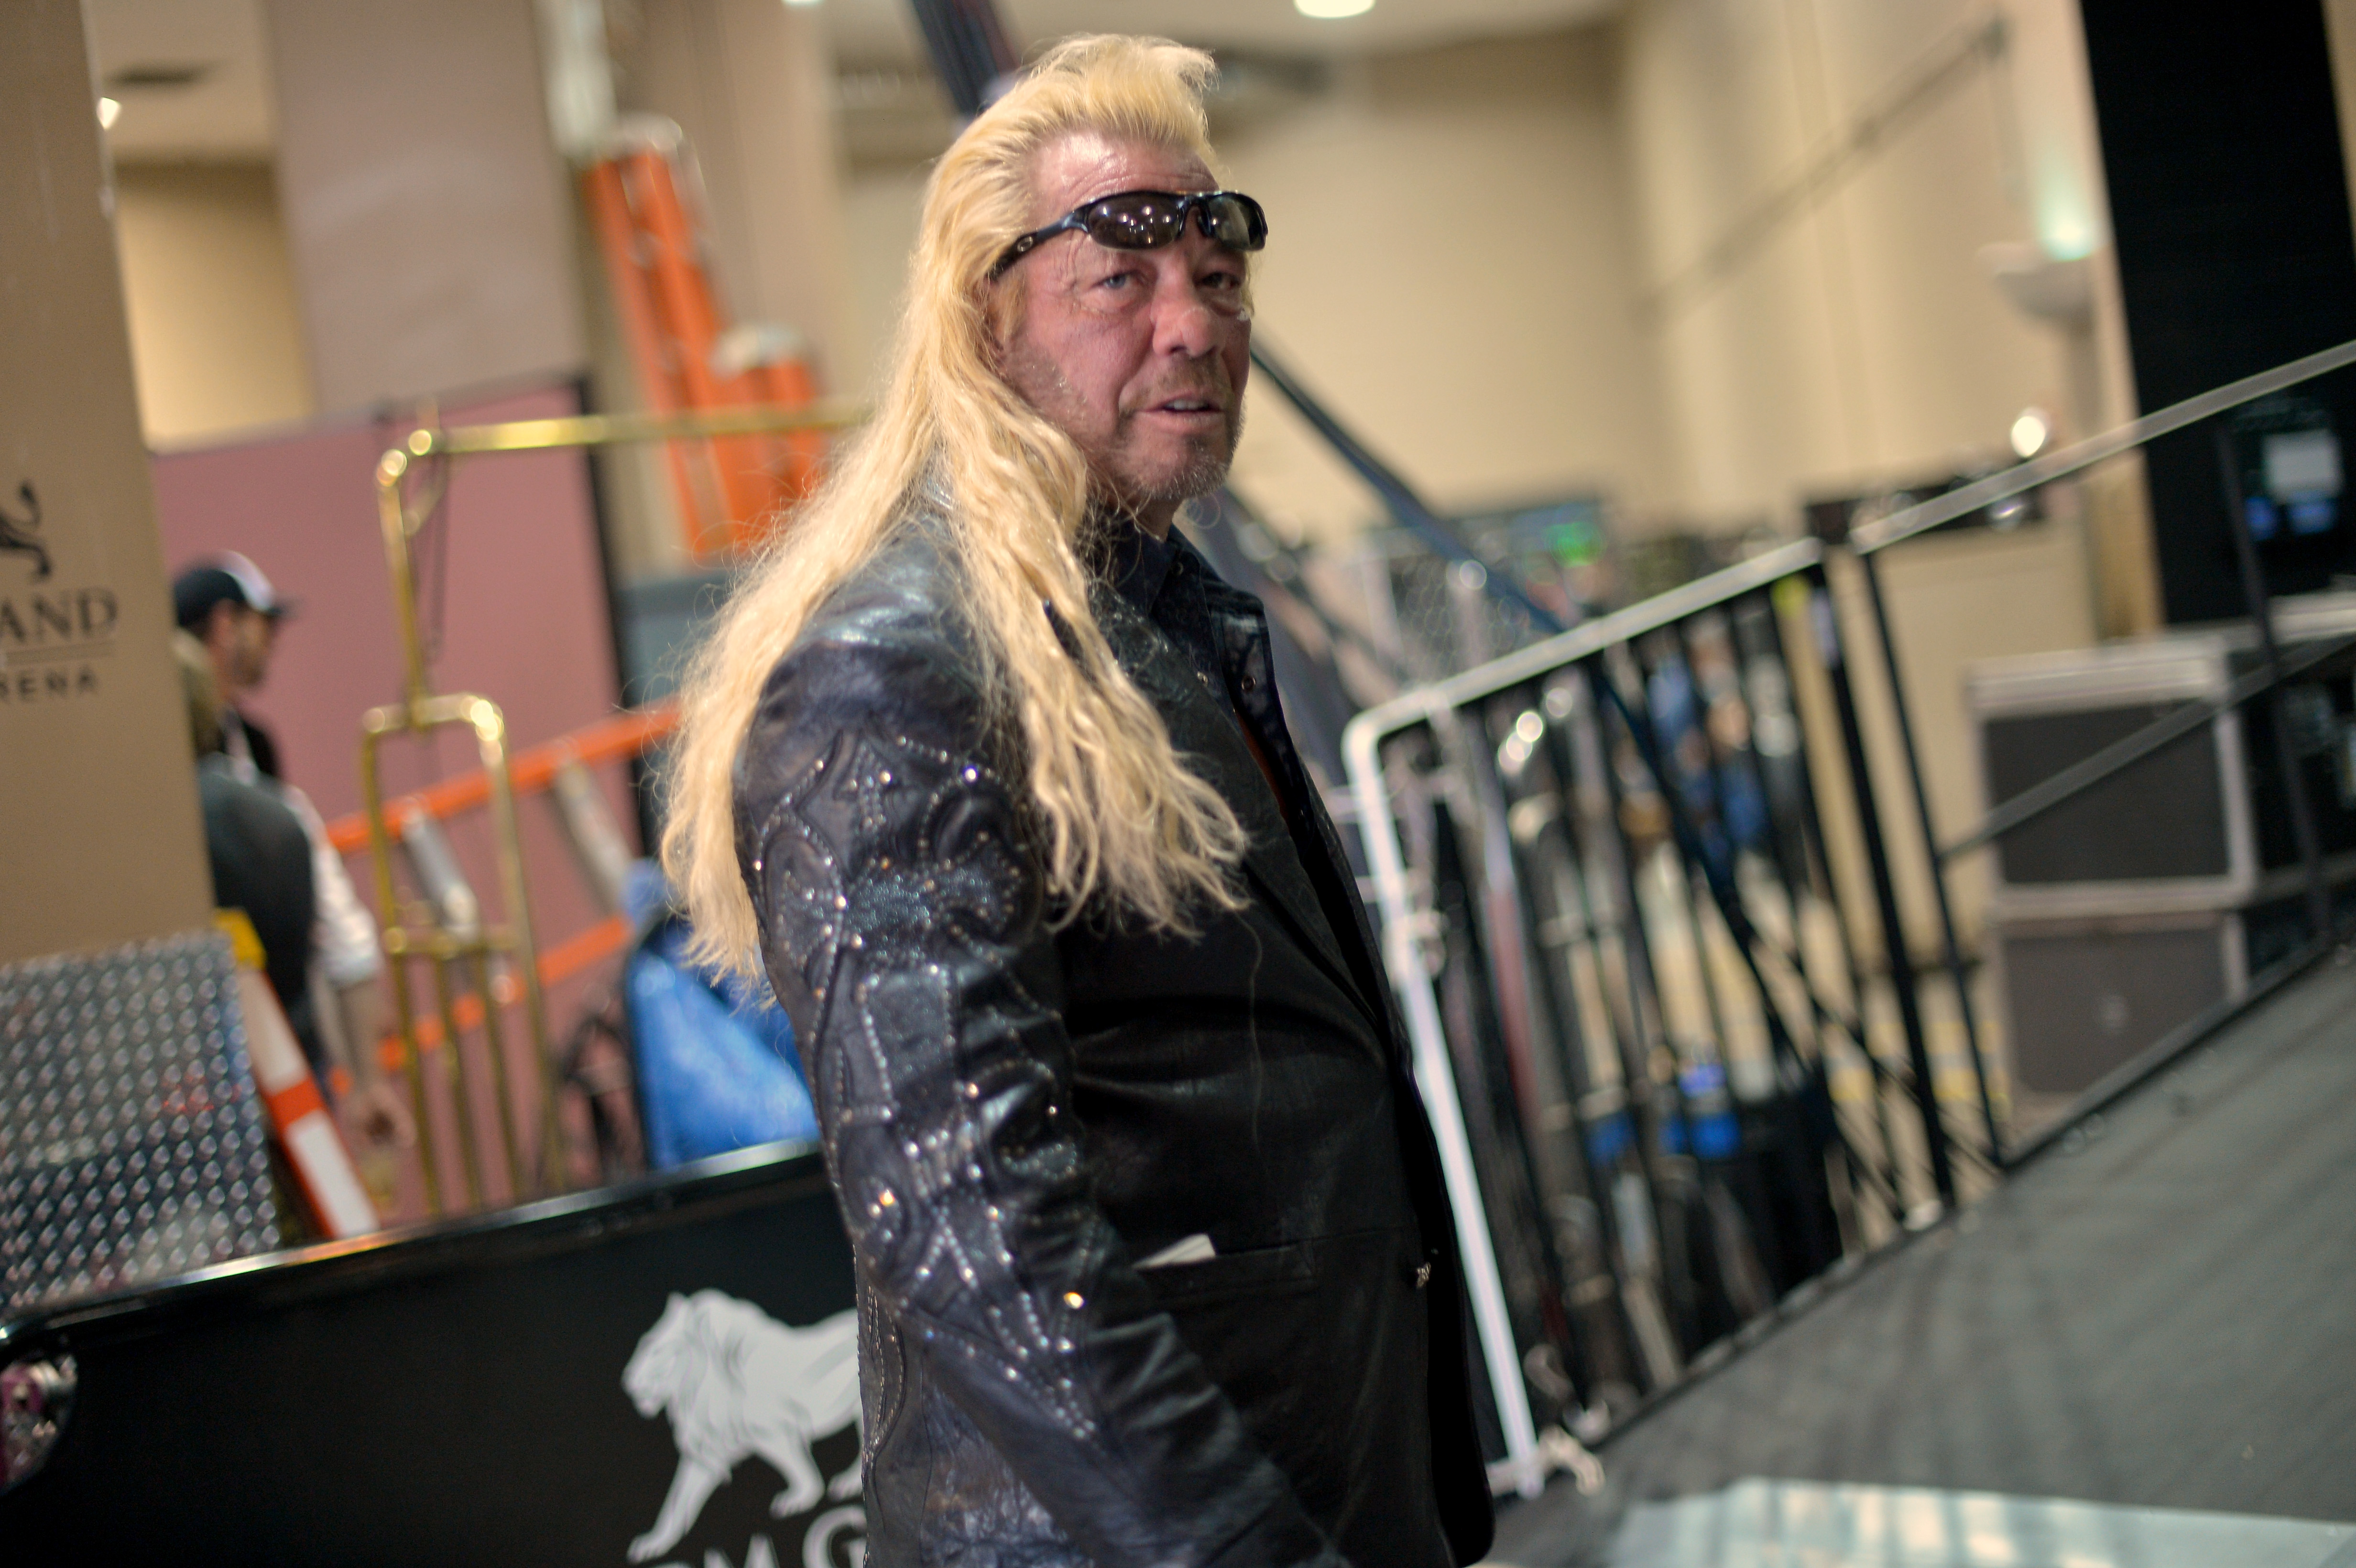 Duane Chapman, better known as Dog the Bounty Hunter, is seen backstage at the Country Music Awards in 2013